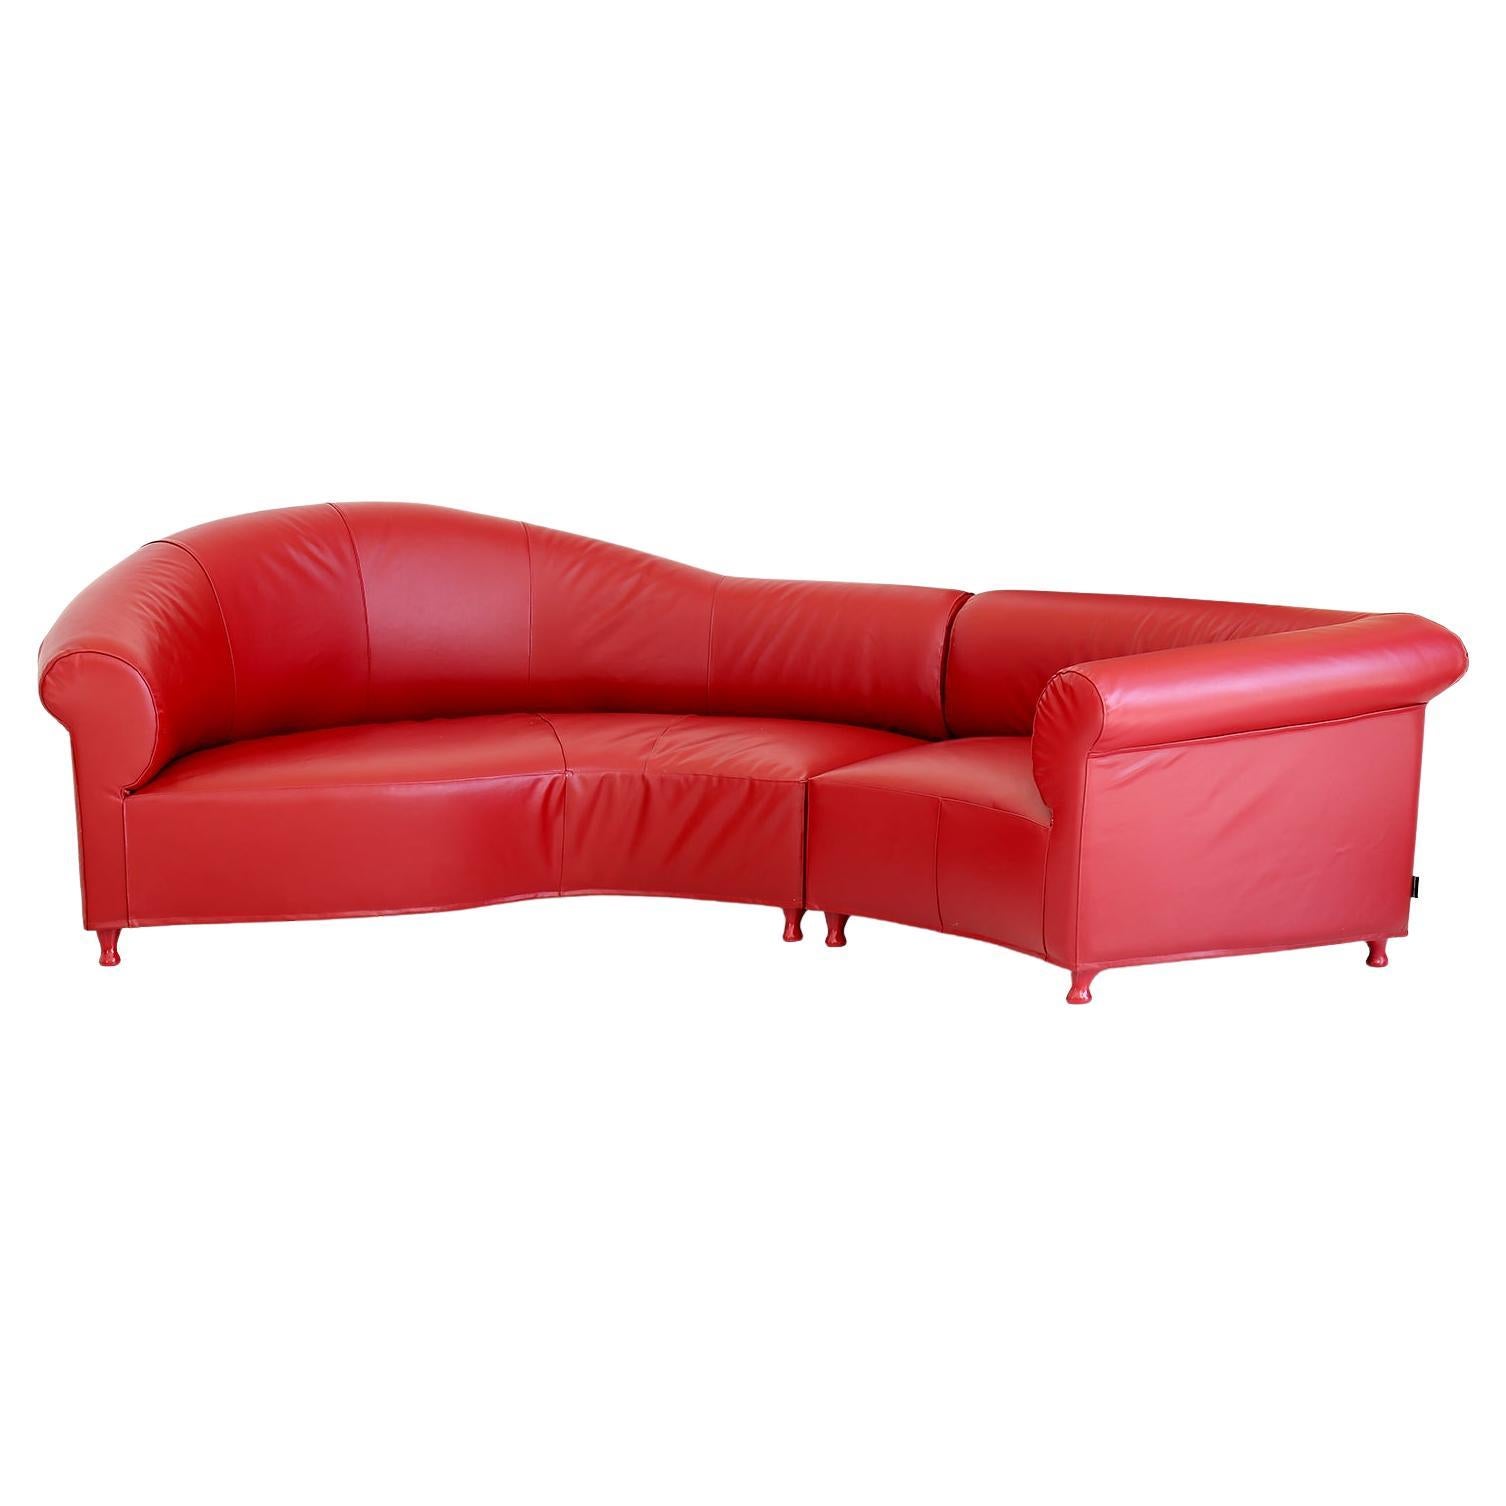 Giovannetti, 90s Contemporary Modular Leather Sofa by S. Giobbi, Red "Galassia" For Sale